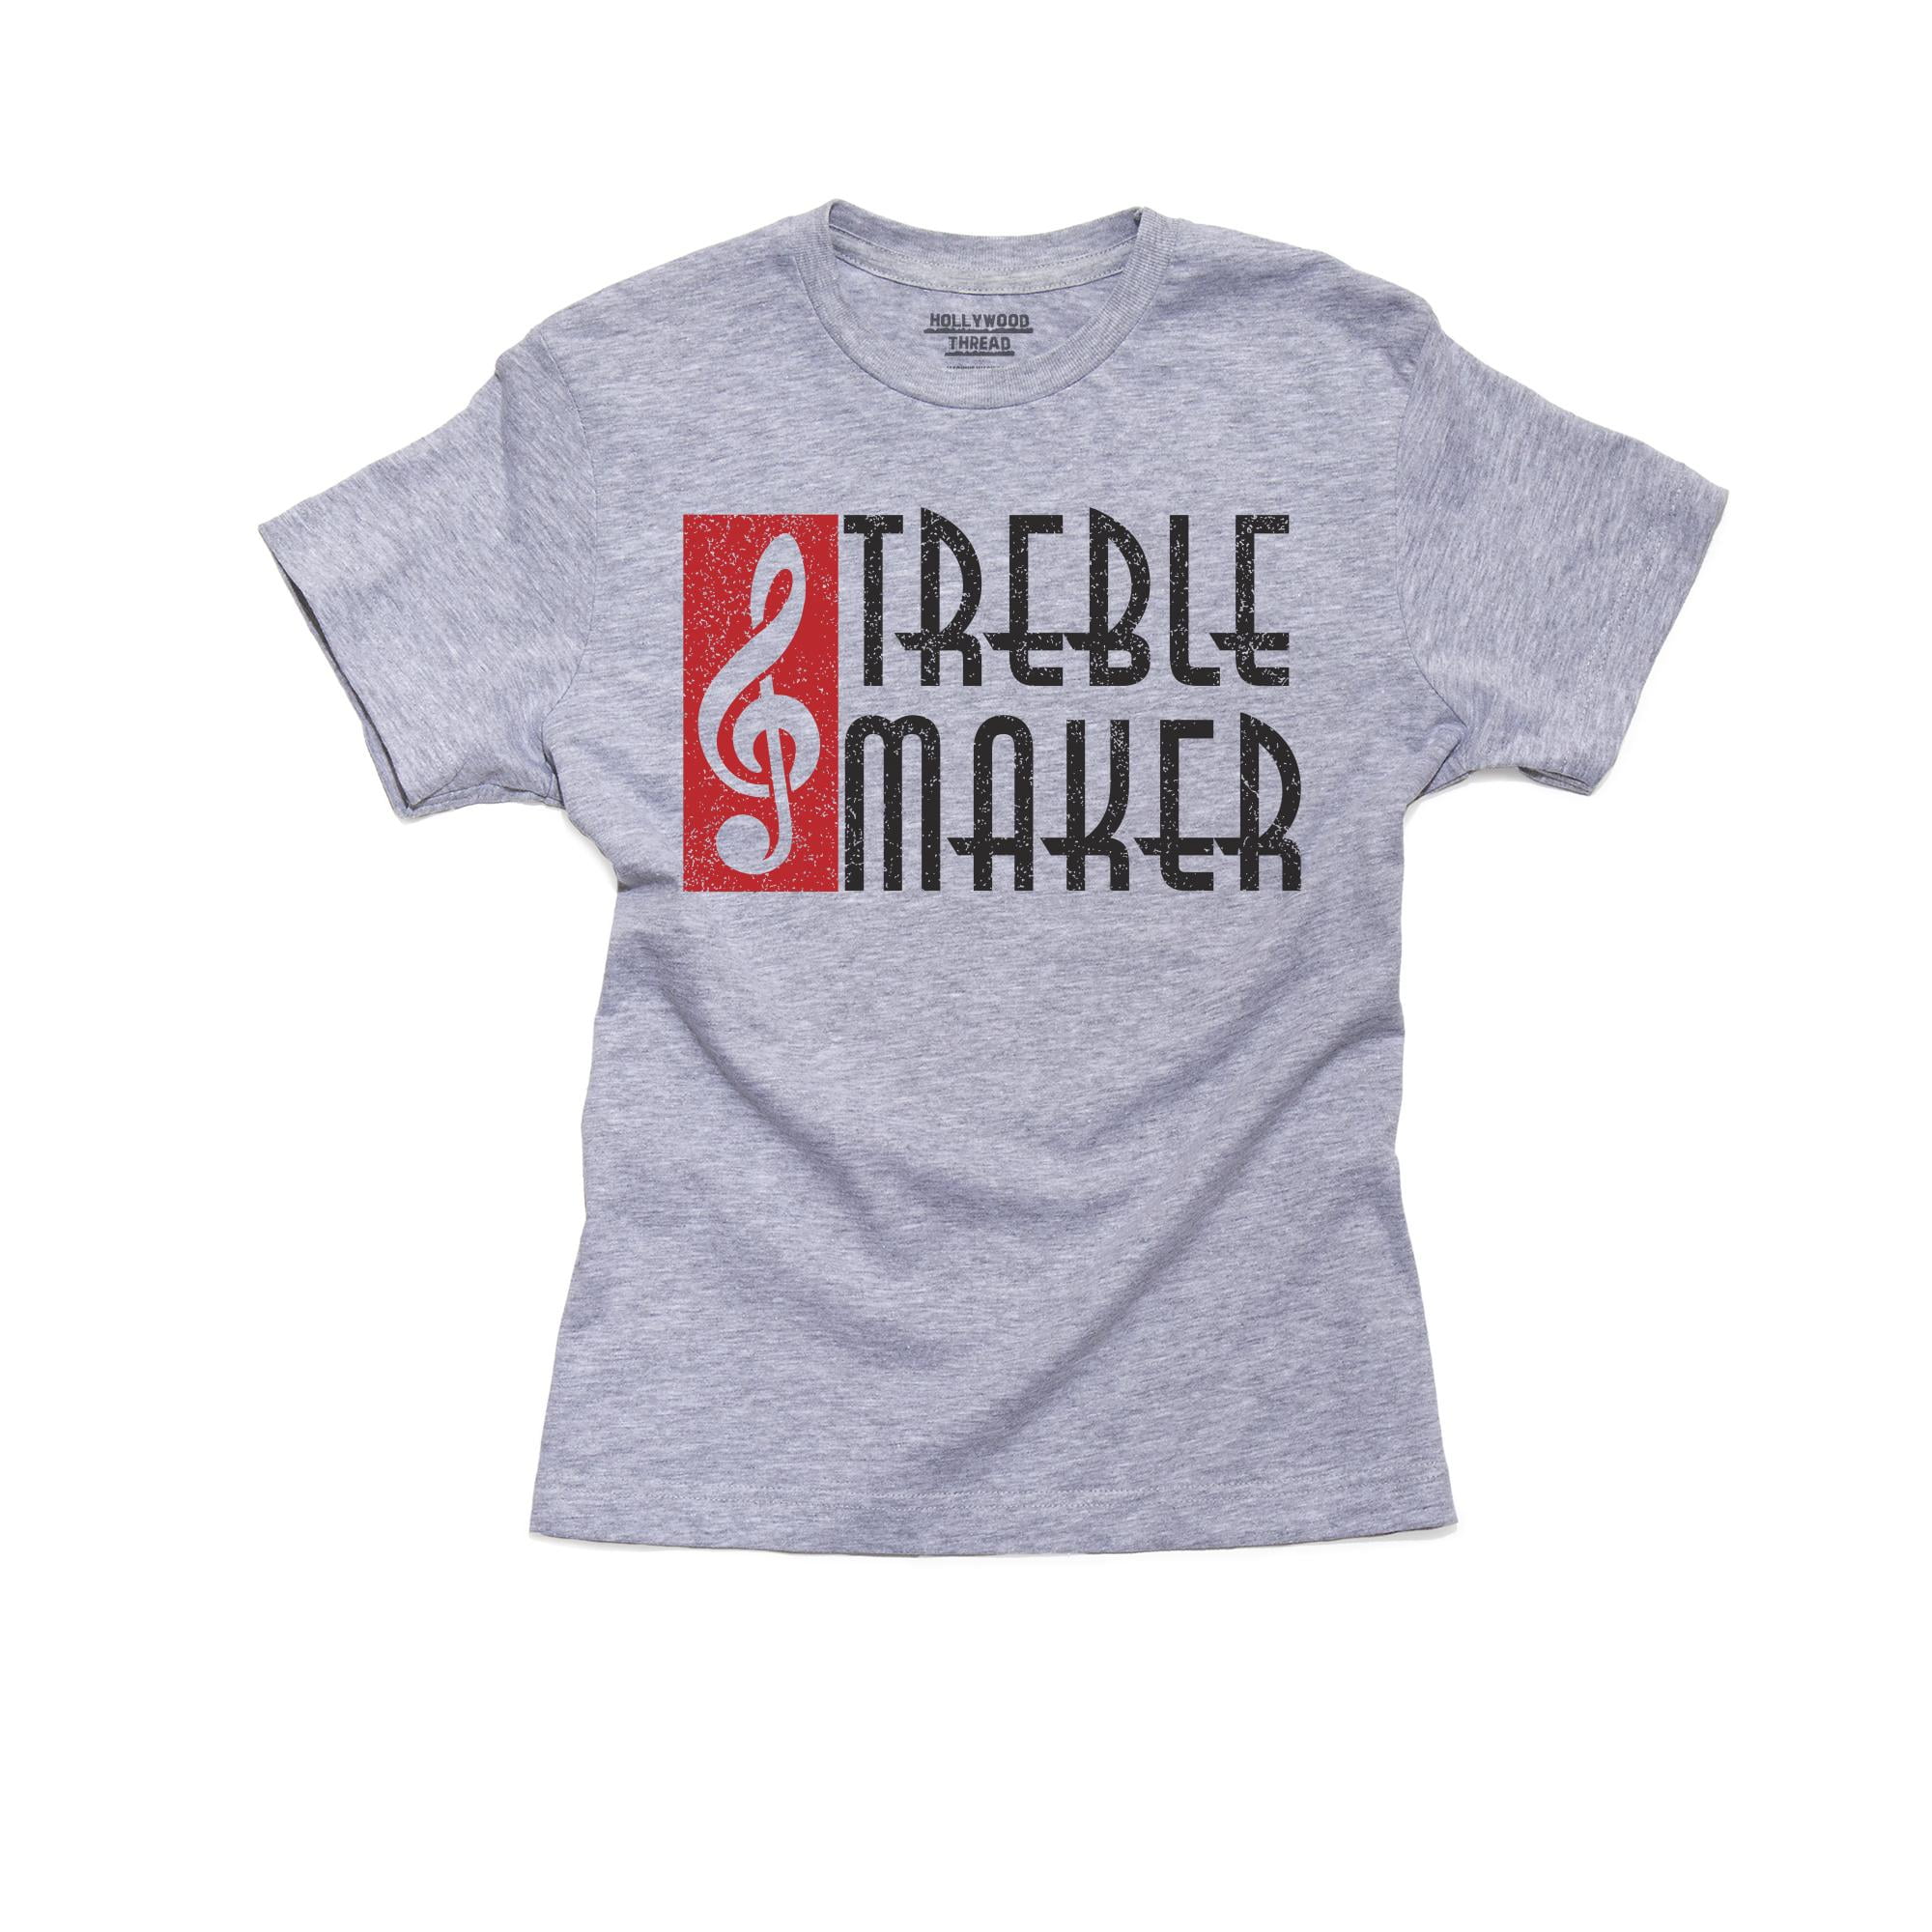 Treble Maker Trouble Maker Music Band Orchestra Boy's Cotton Youth Grey ...